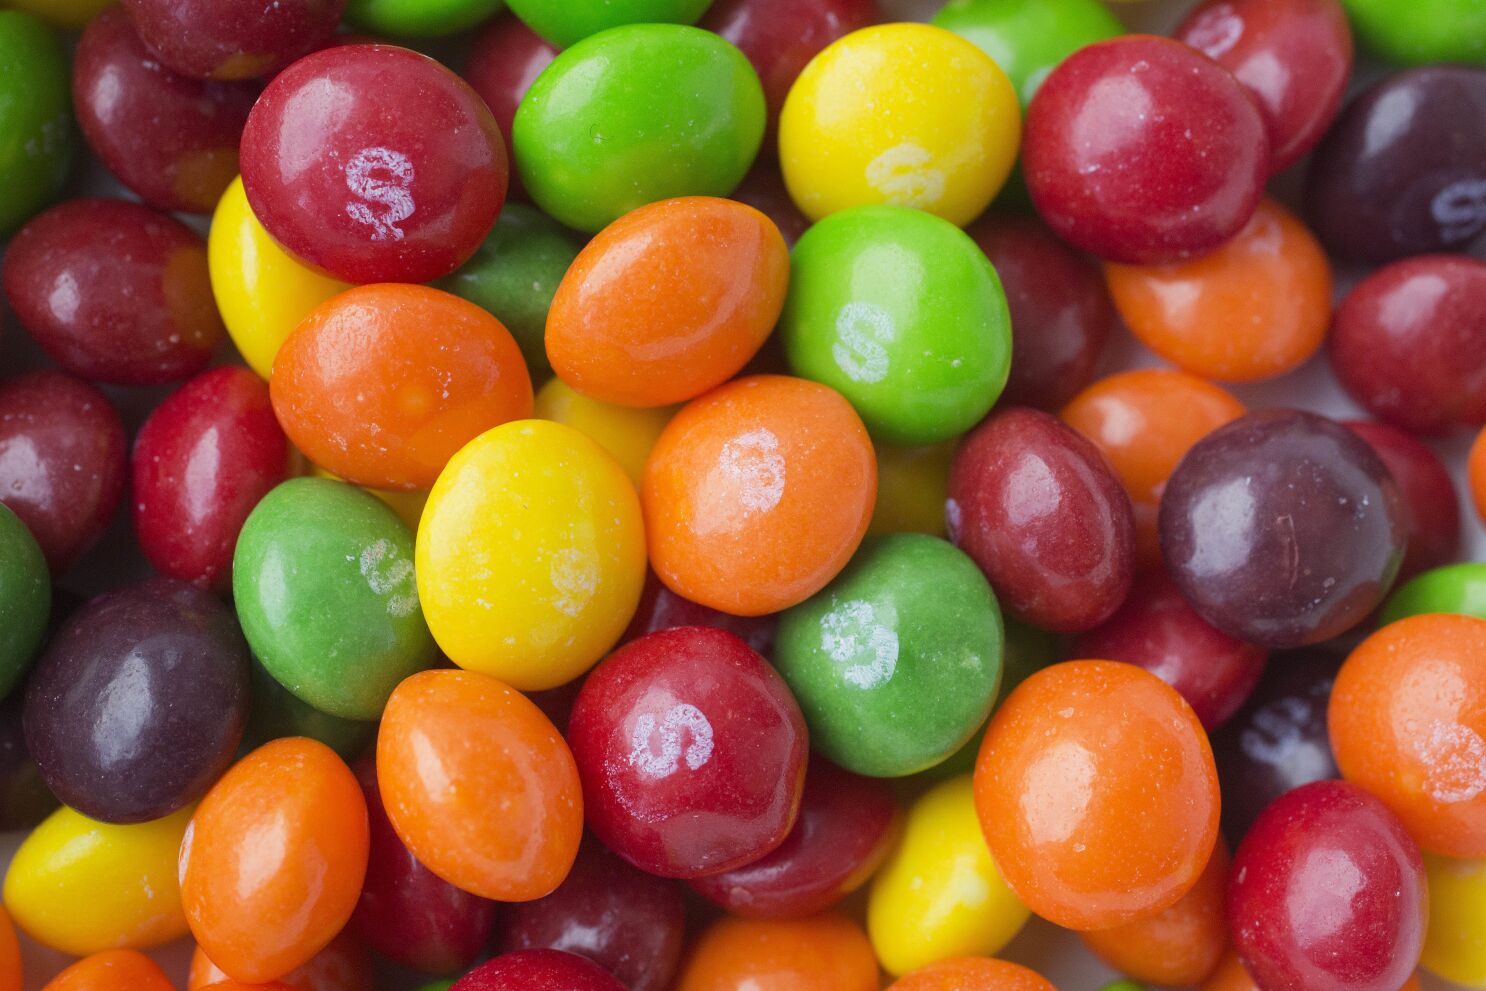 Things people stuck up their nose - skittles candy lawsuit